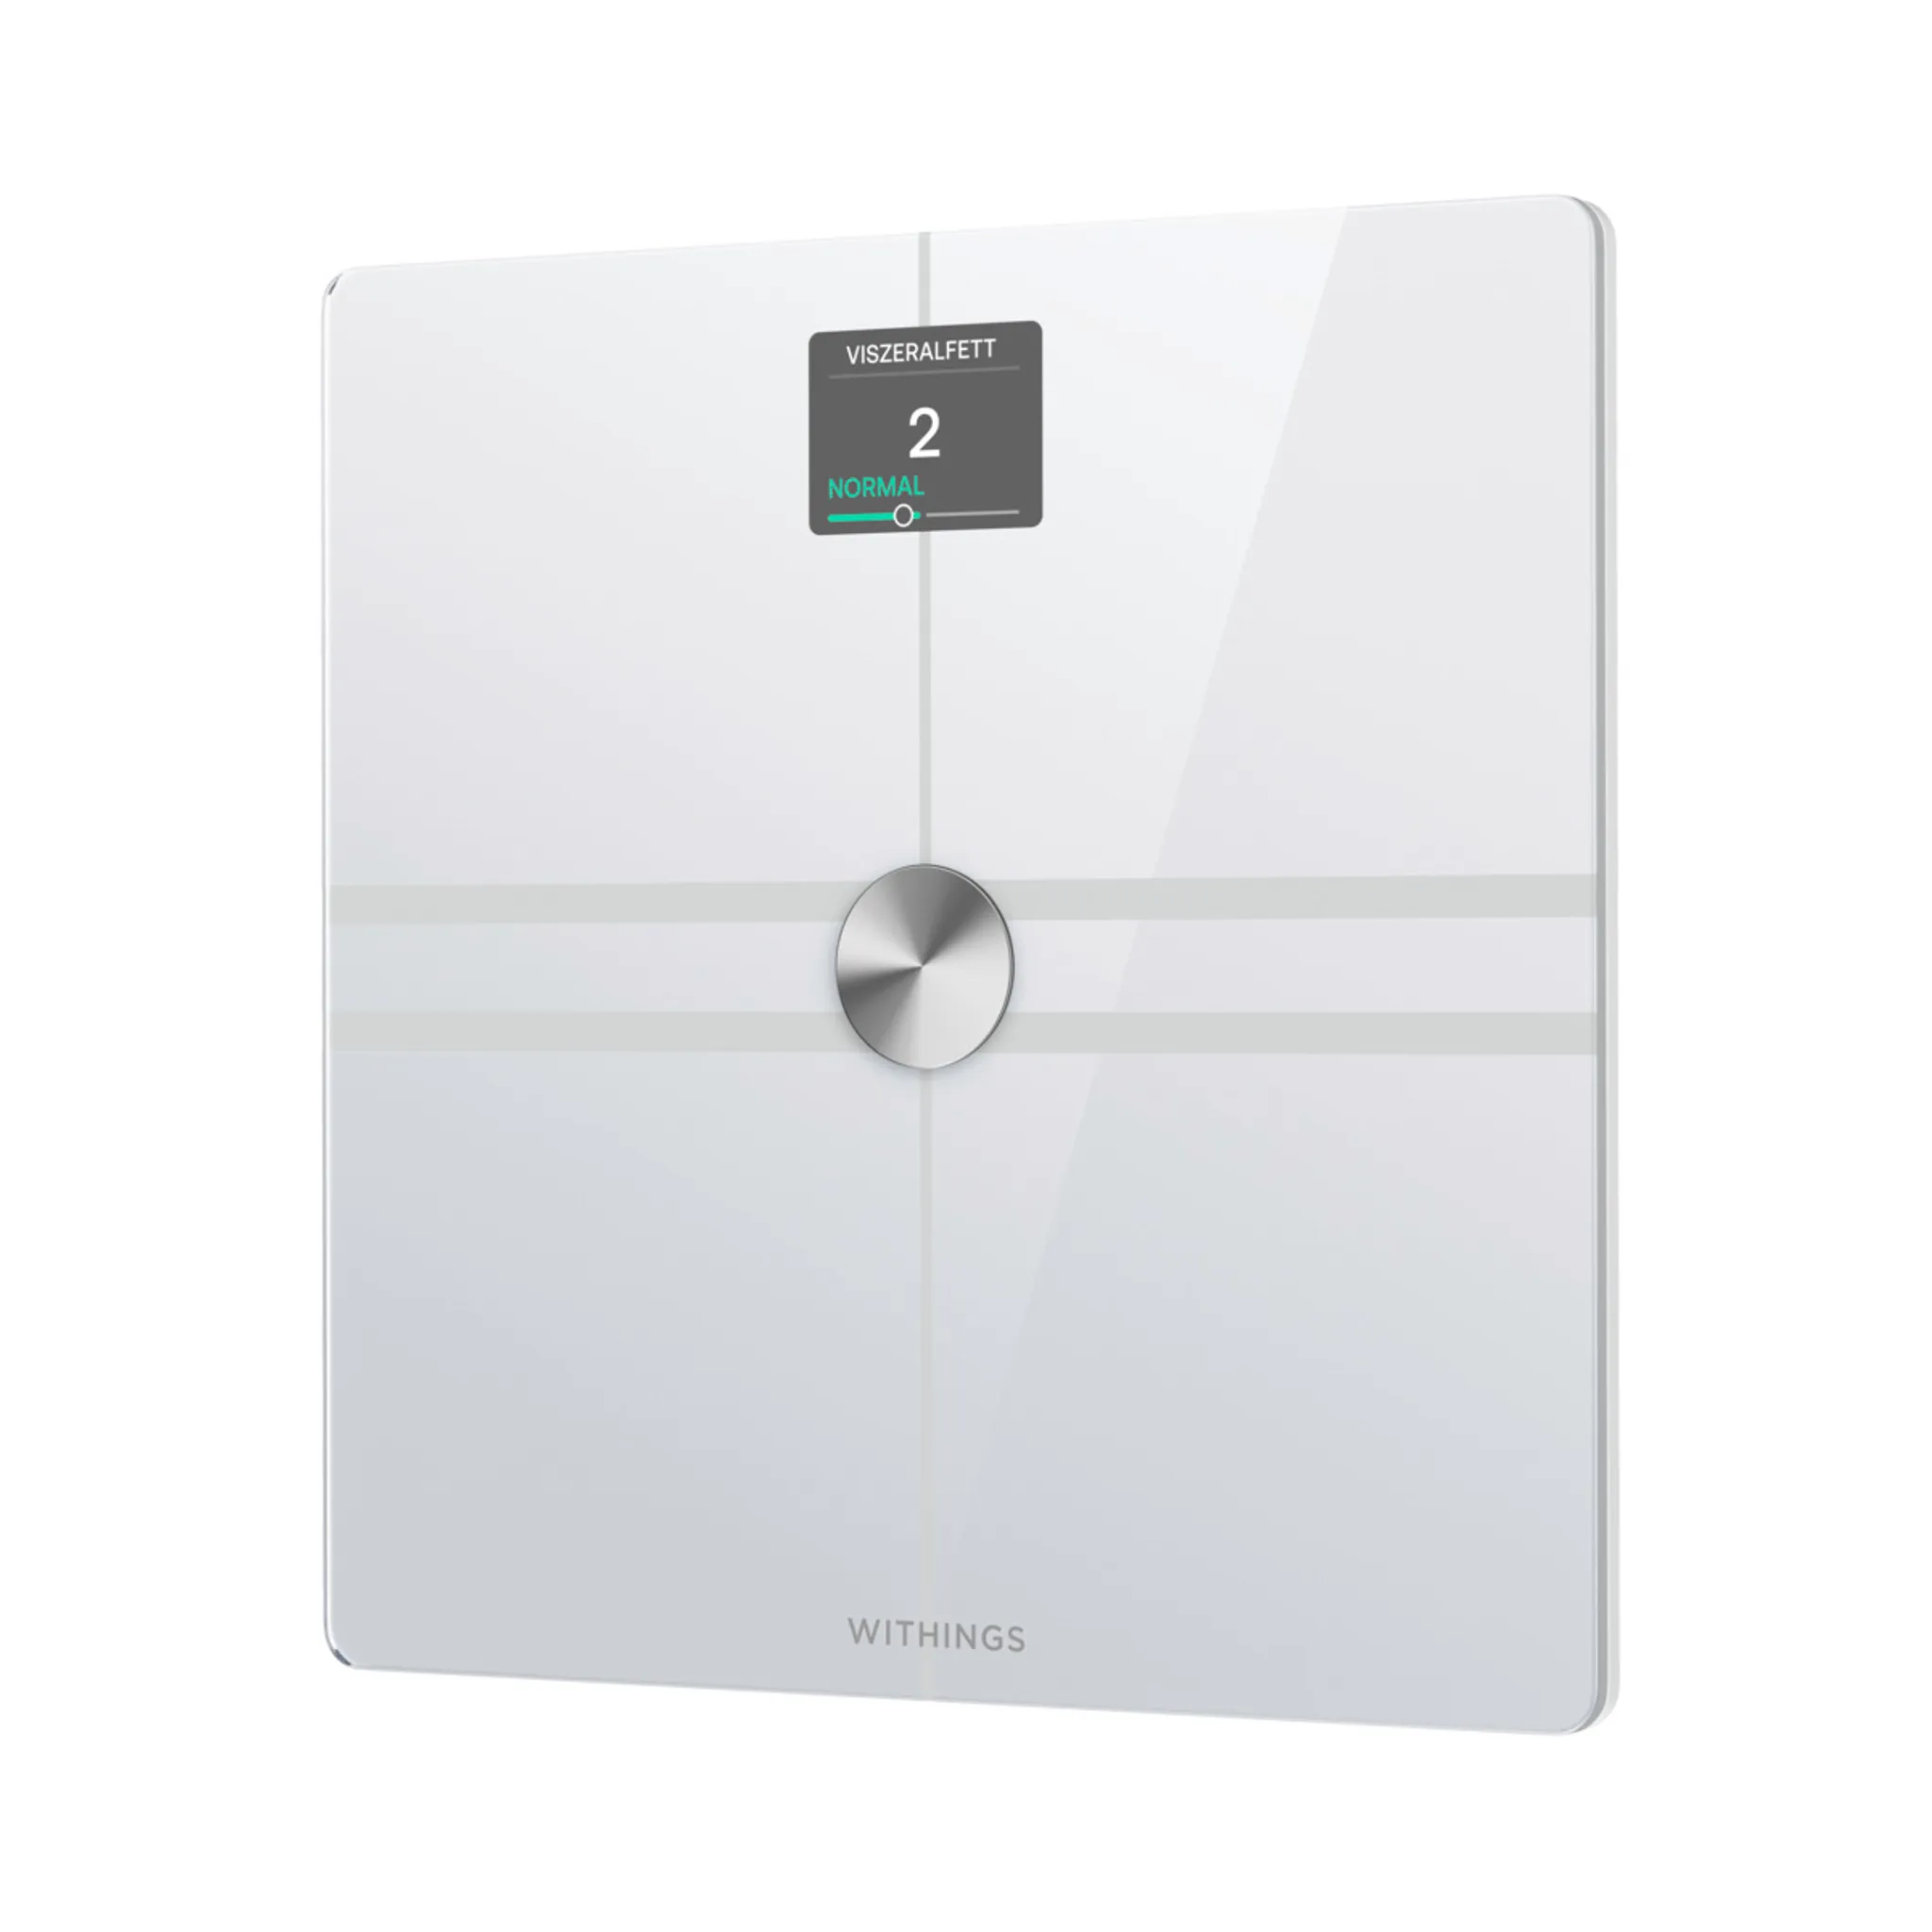 WITHINGS Body Comp White Körperanalyse-Waage